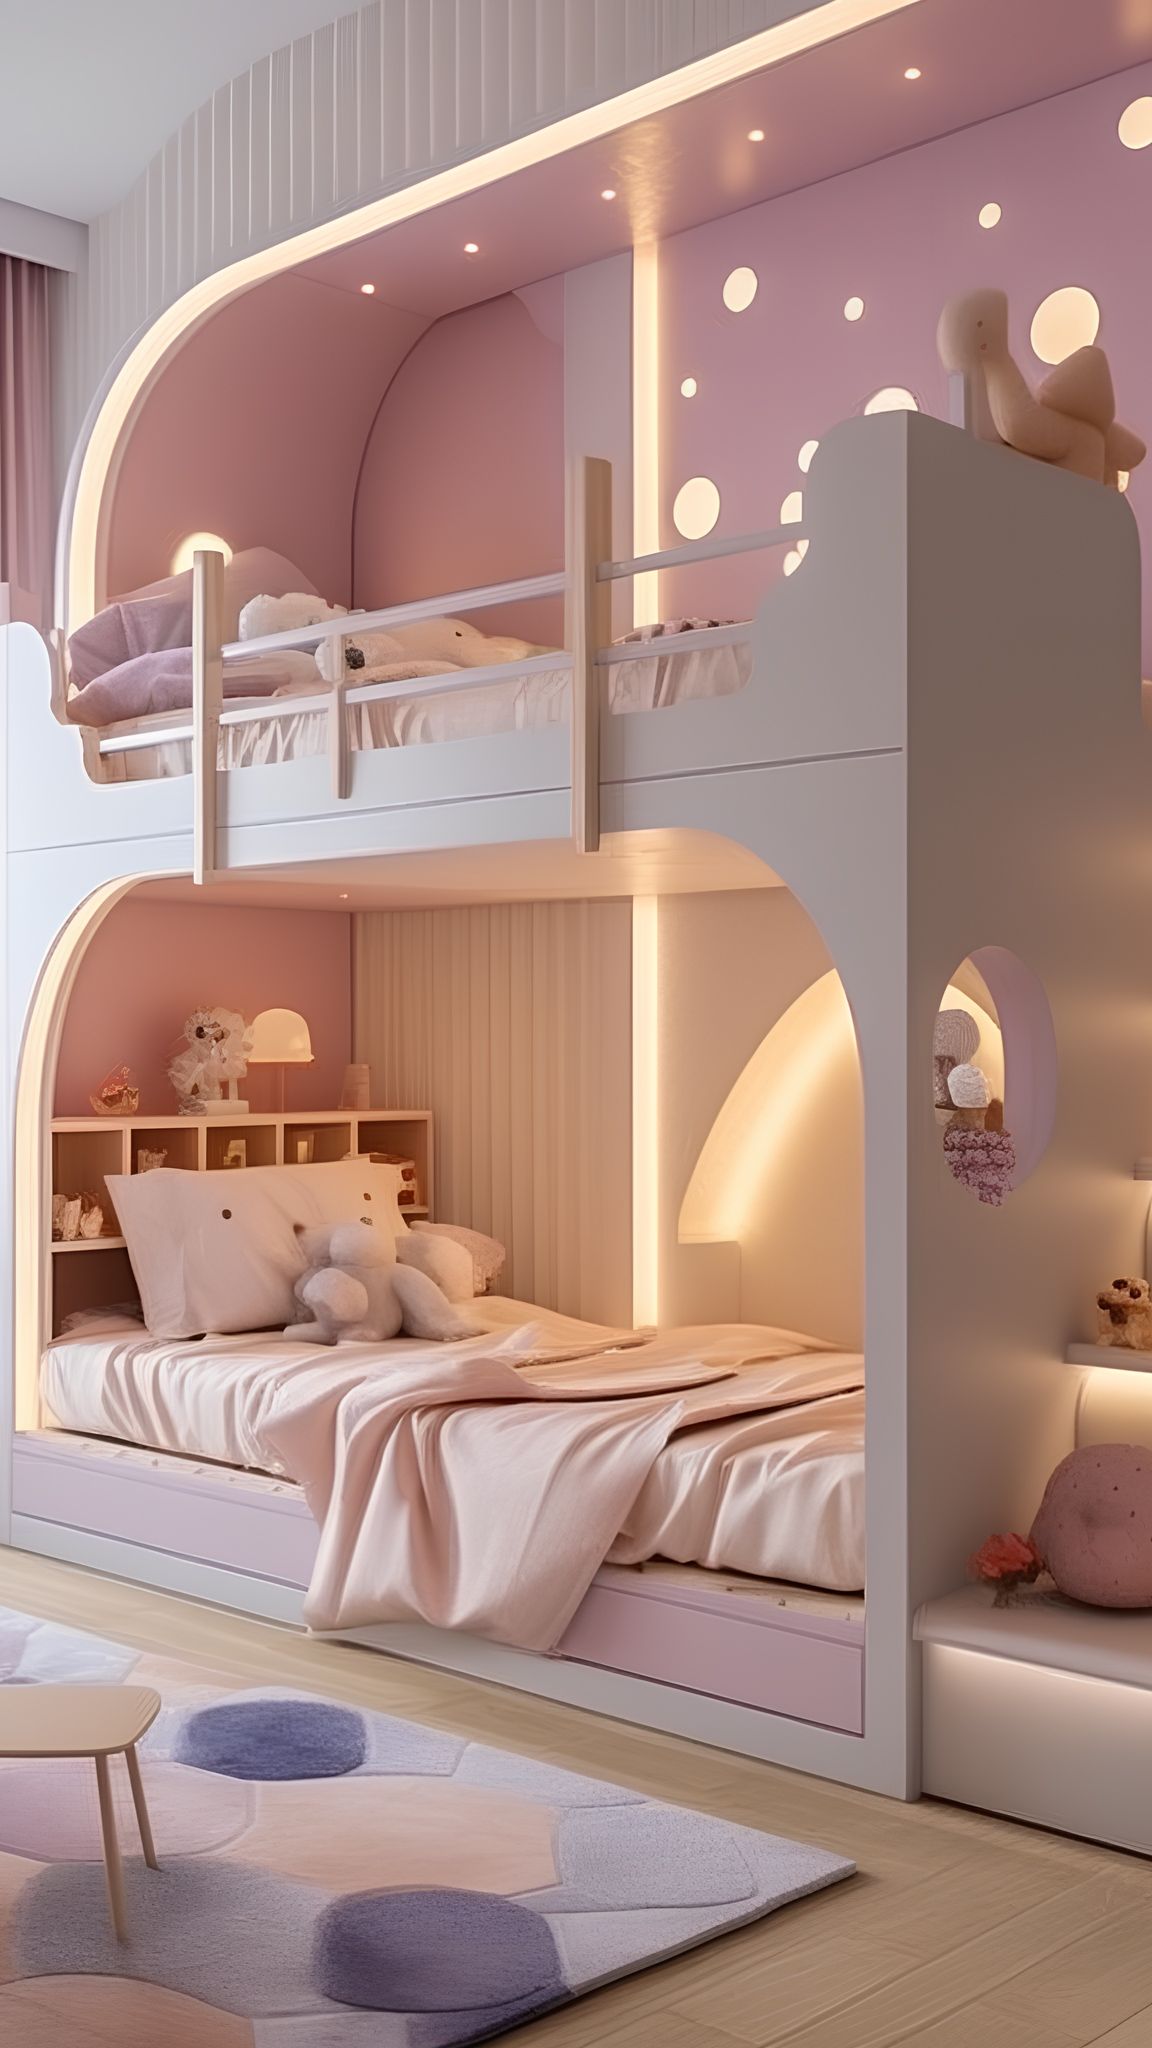 Bunk Beds For Kids: Maximize Space and Fun with Stylish Bunk Beds for Kids